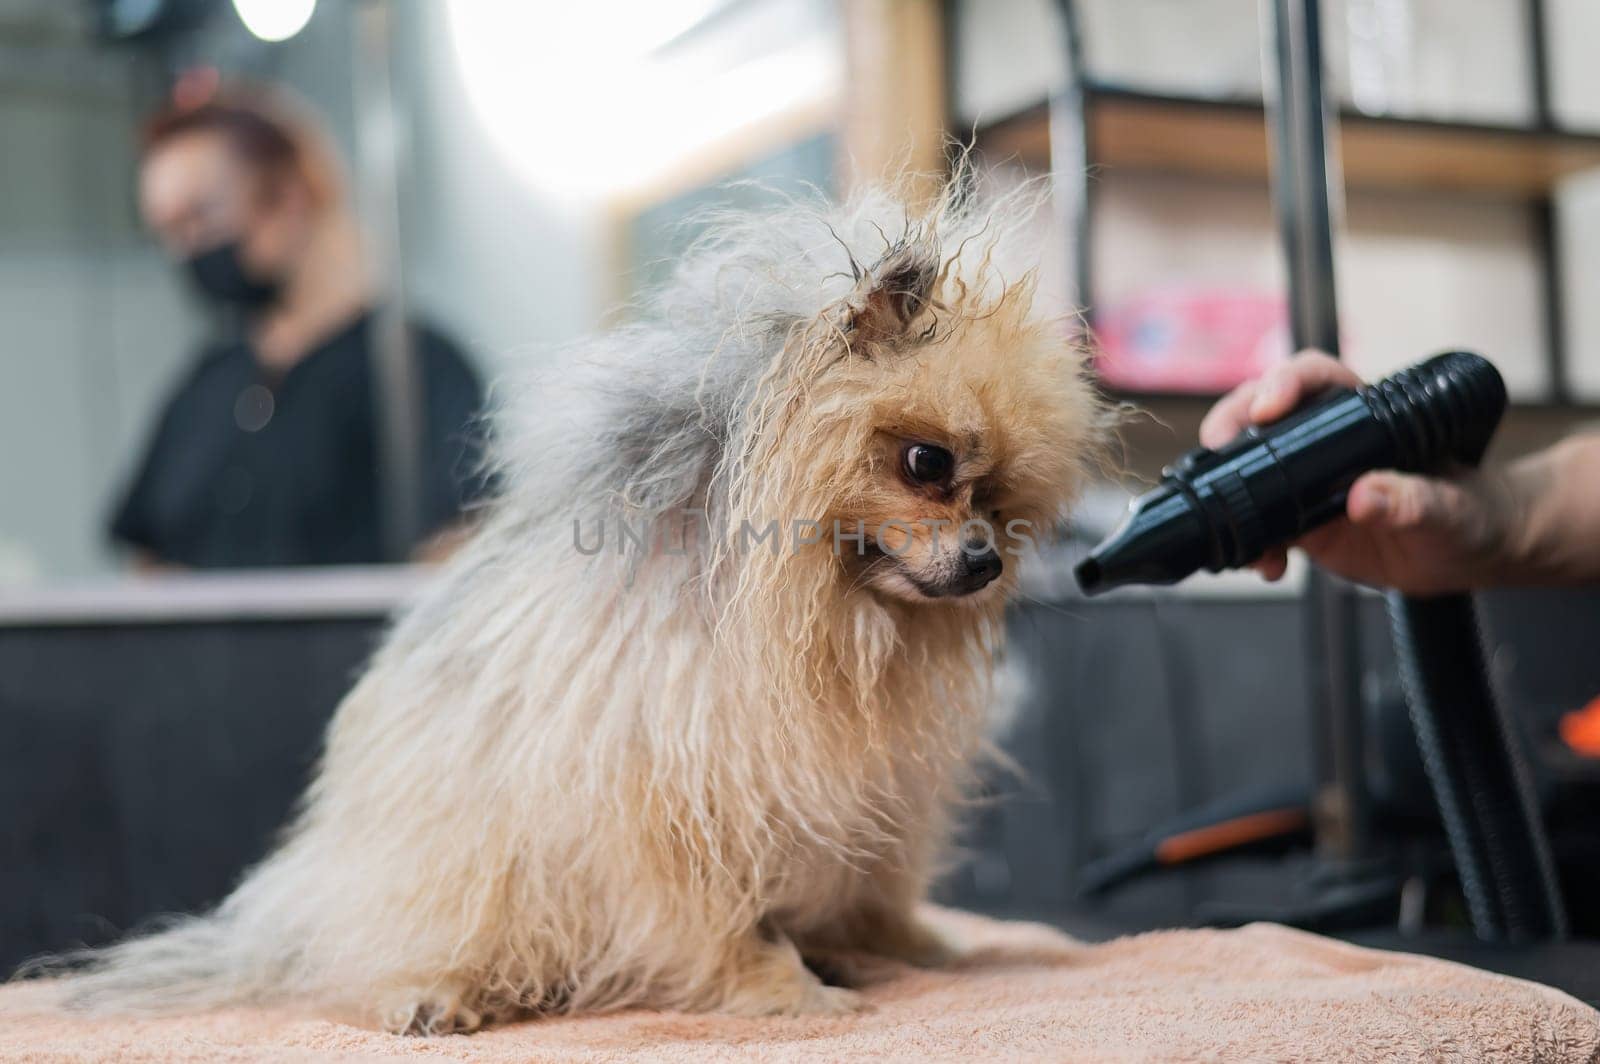 A woman dries a Pomeranian with a hair dryer after washing in a grooming salon. by mrwed54